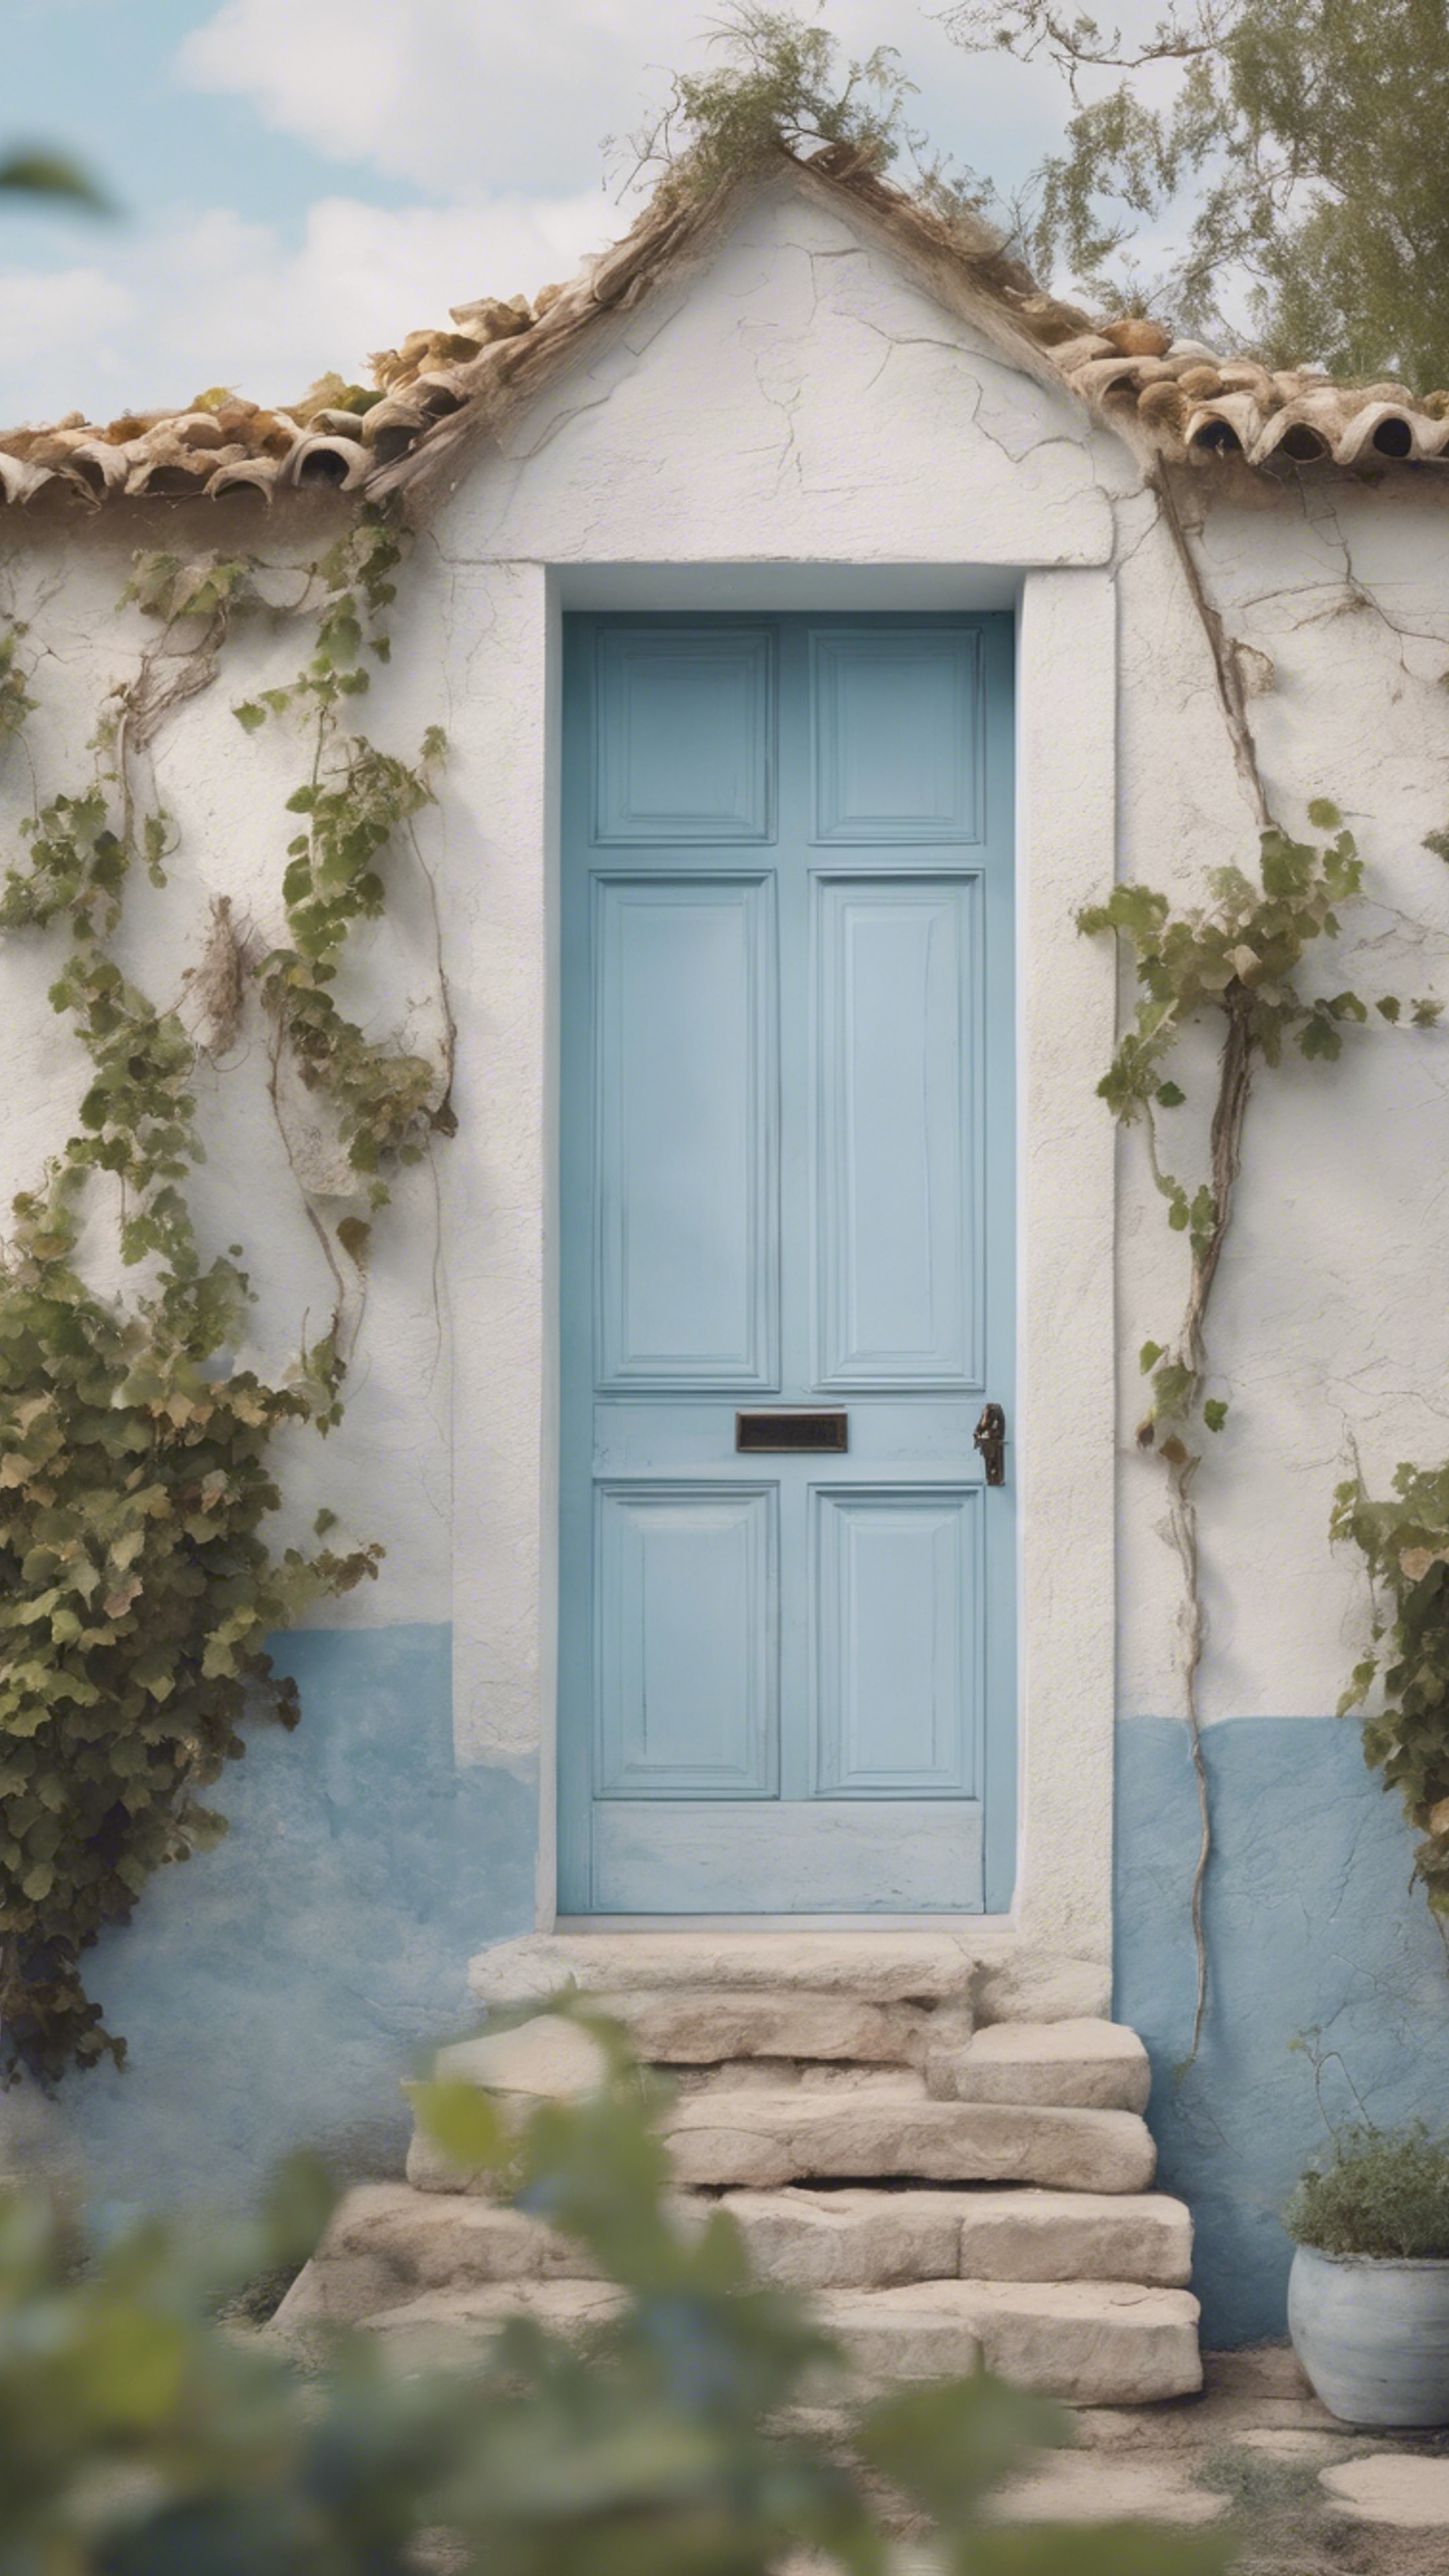 A pastel blue painted door on a rustic white house, a vineyard in the background. Tapeta[5cba61123f91494ab86f]